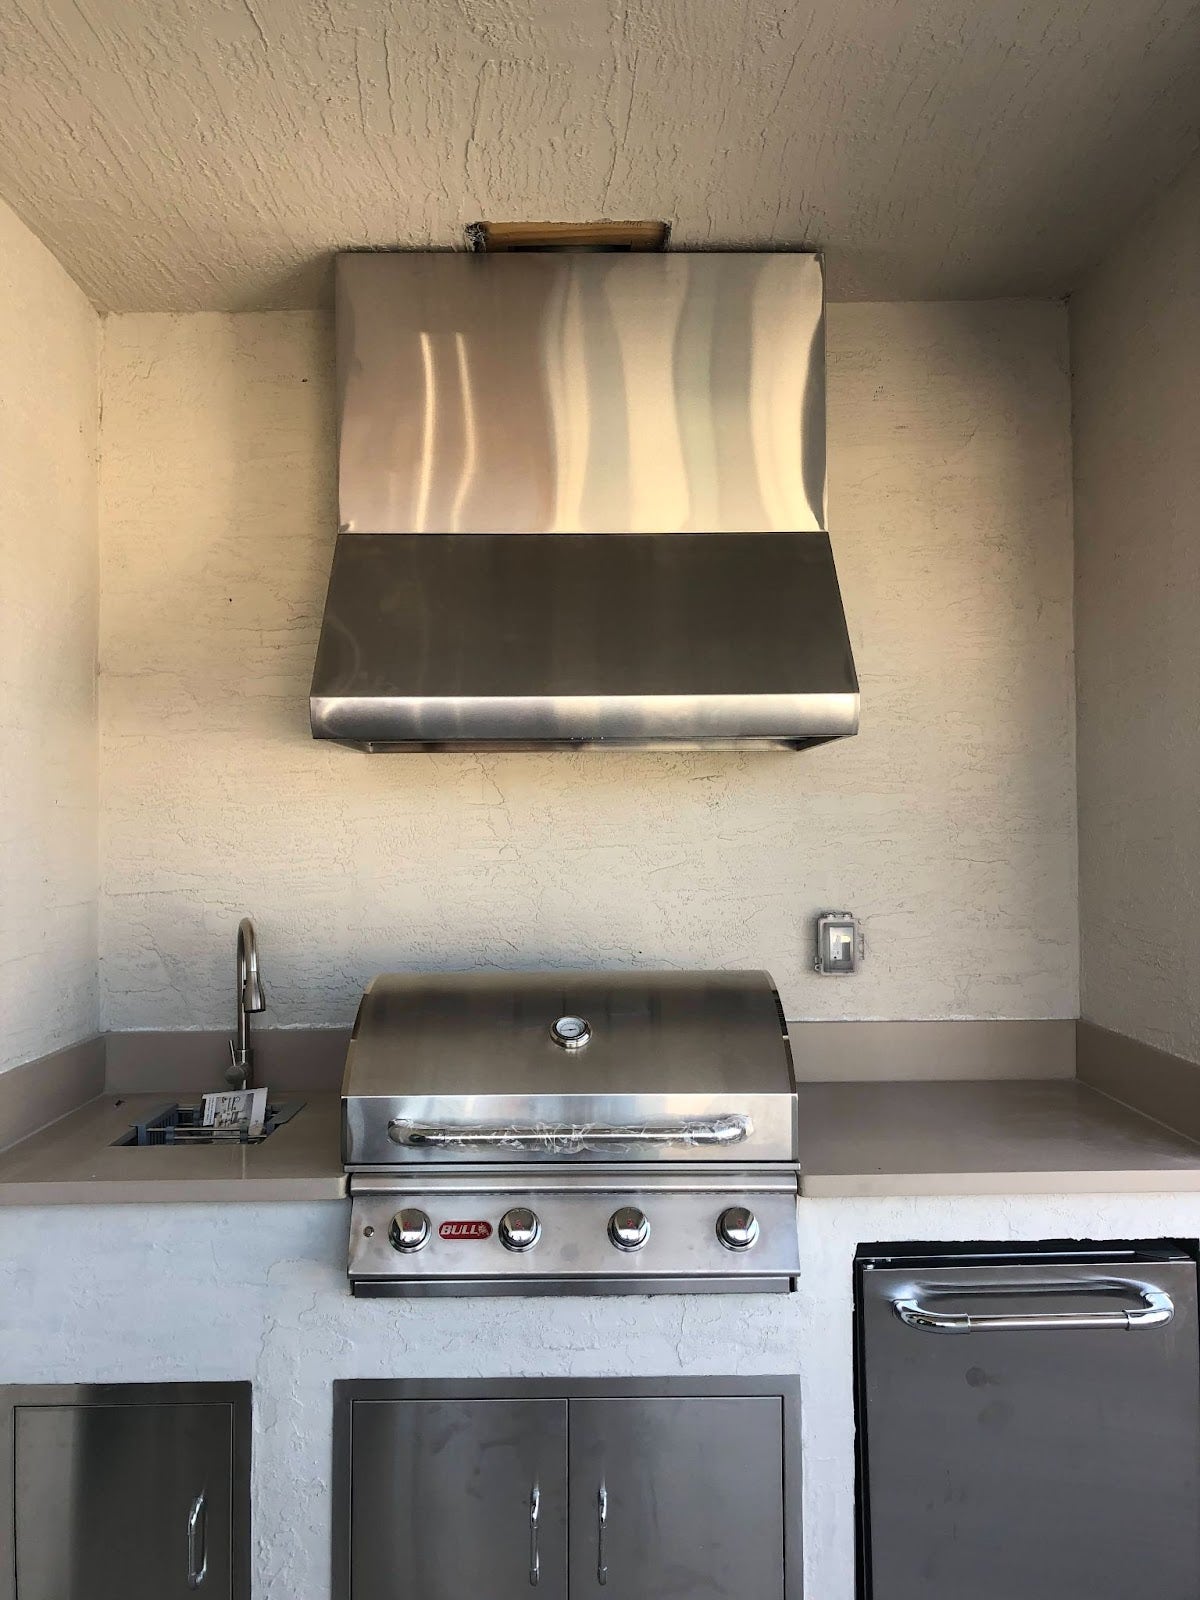 Compact and modern outdoor grill area featuring a Proline range hood, with clean lines and stainless steel cabinetry for a sleek cooking experience - prolinerangehoods.com.